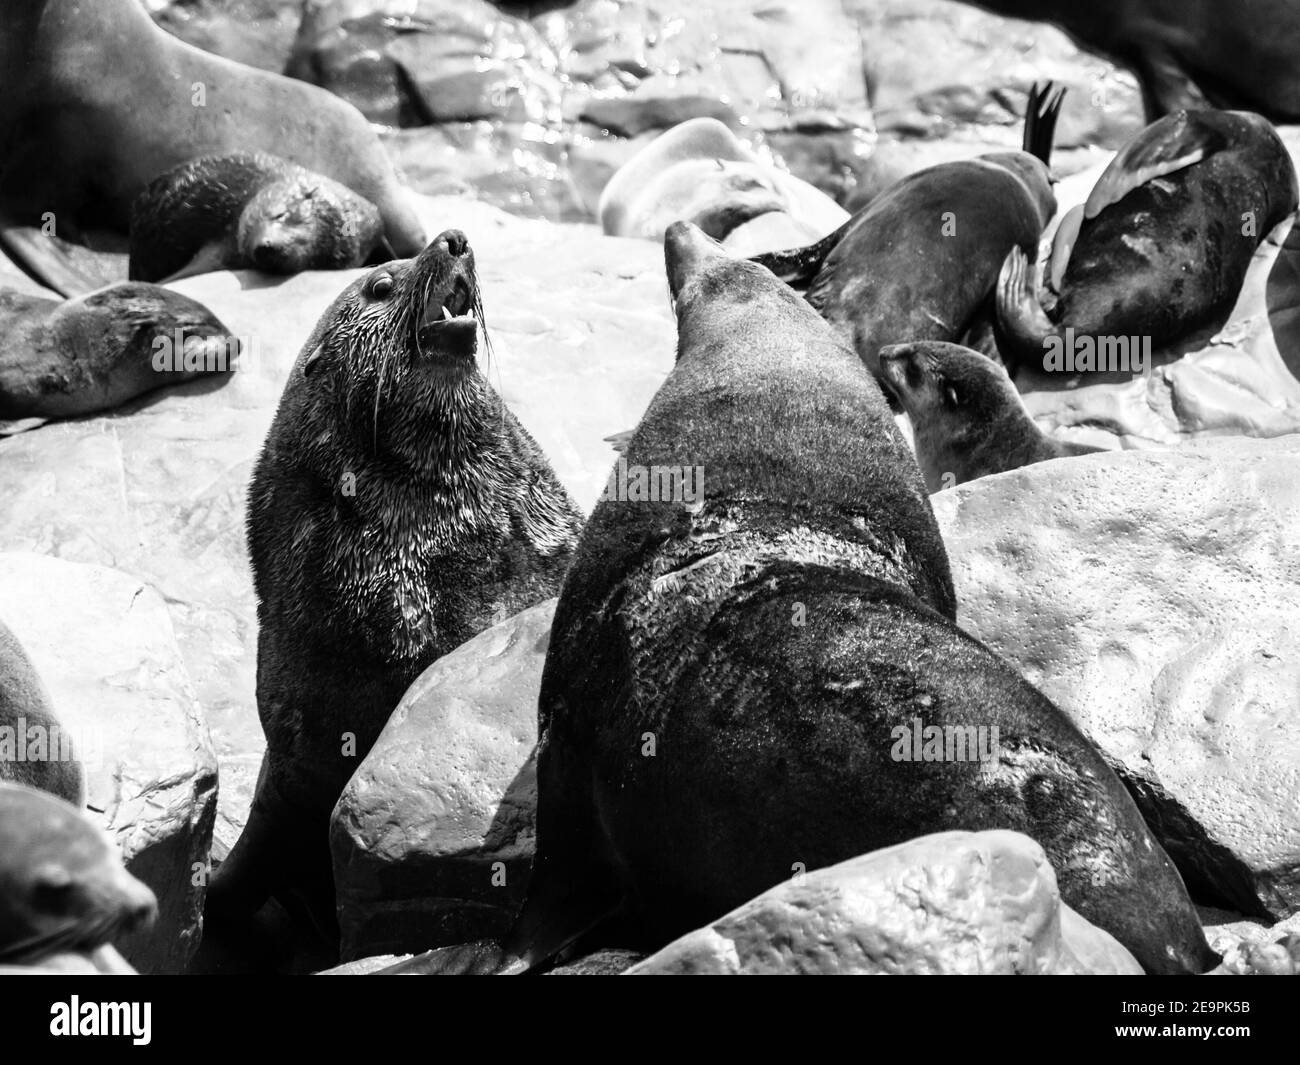 Two dangerous brown fur seals fighting on a rock. Black and white image. Stock Photo